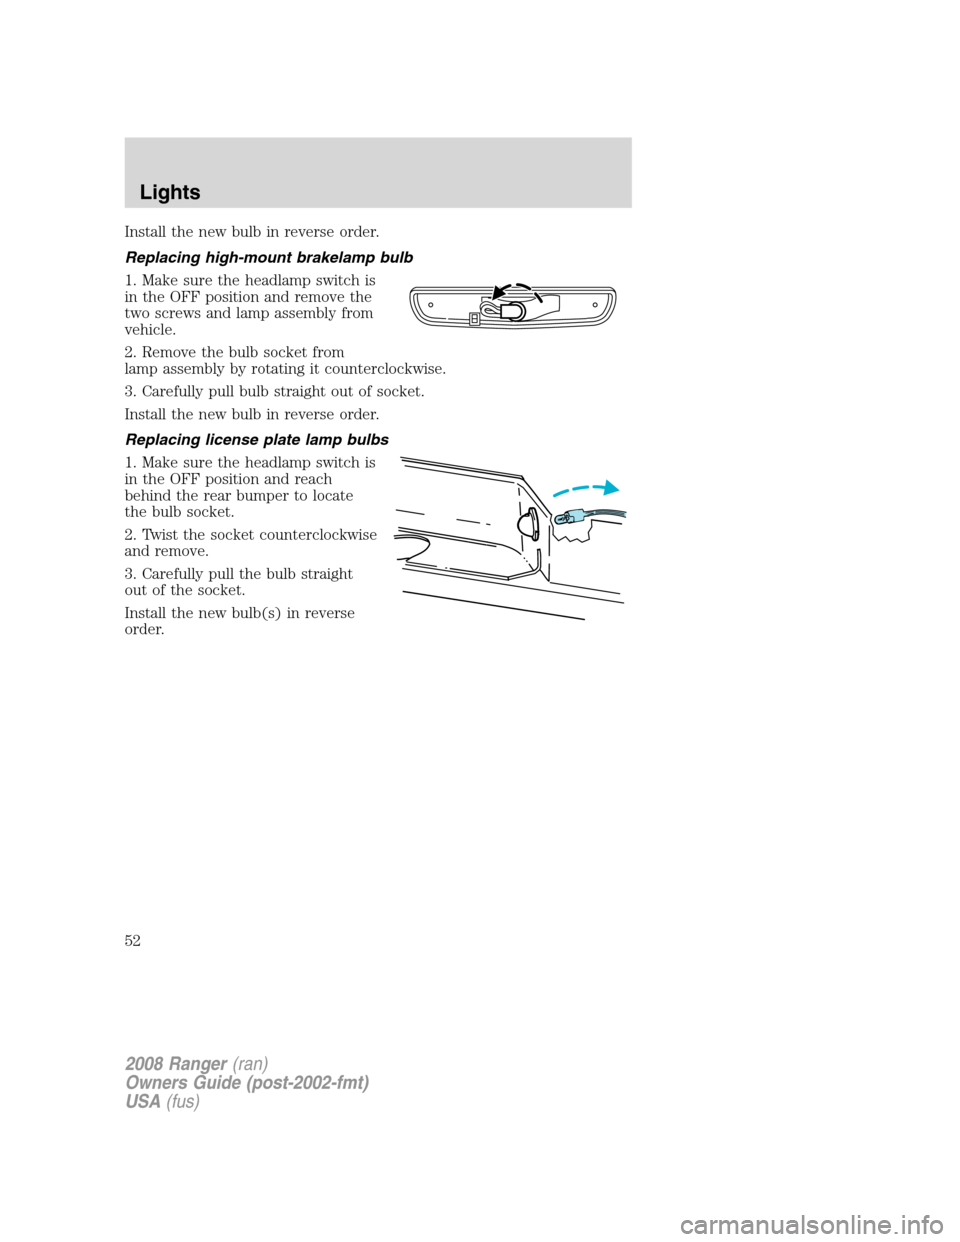 FORD RANGER 2008 2.G Owners Manual Install the new bulb in reverse order.
Replacing high-mount brakelamp bulb
1. Make sure the headlamp switch is
in the OFF position and remove the
two screws and lamp assembly from
vehicle.
2. Remove t